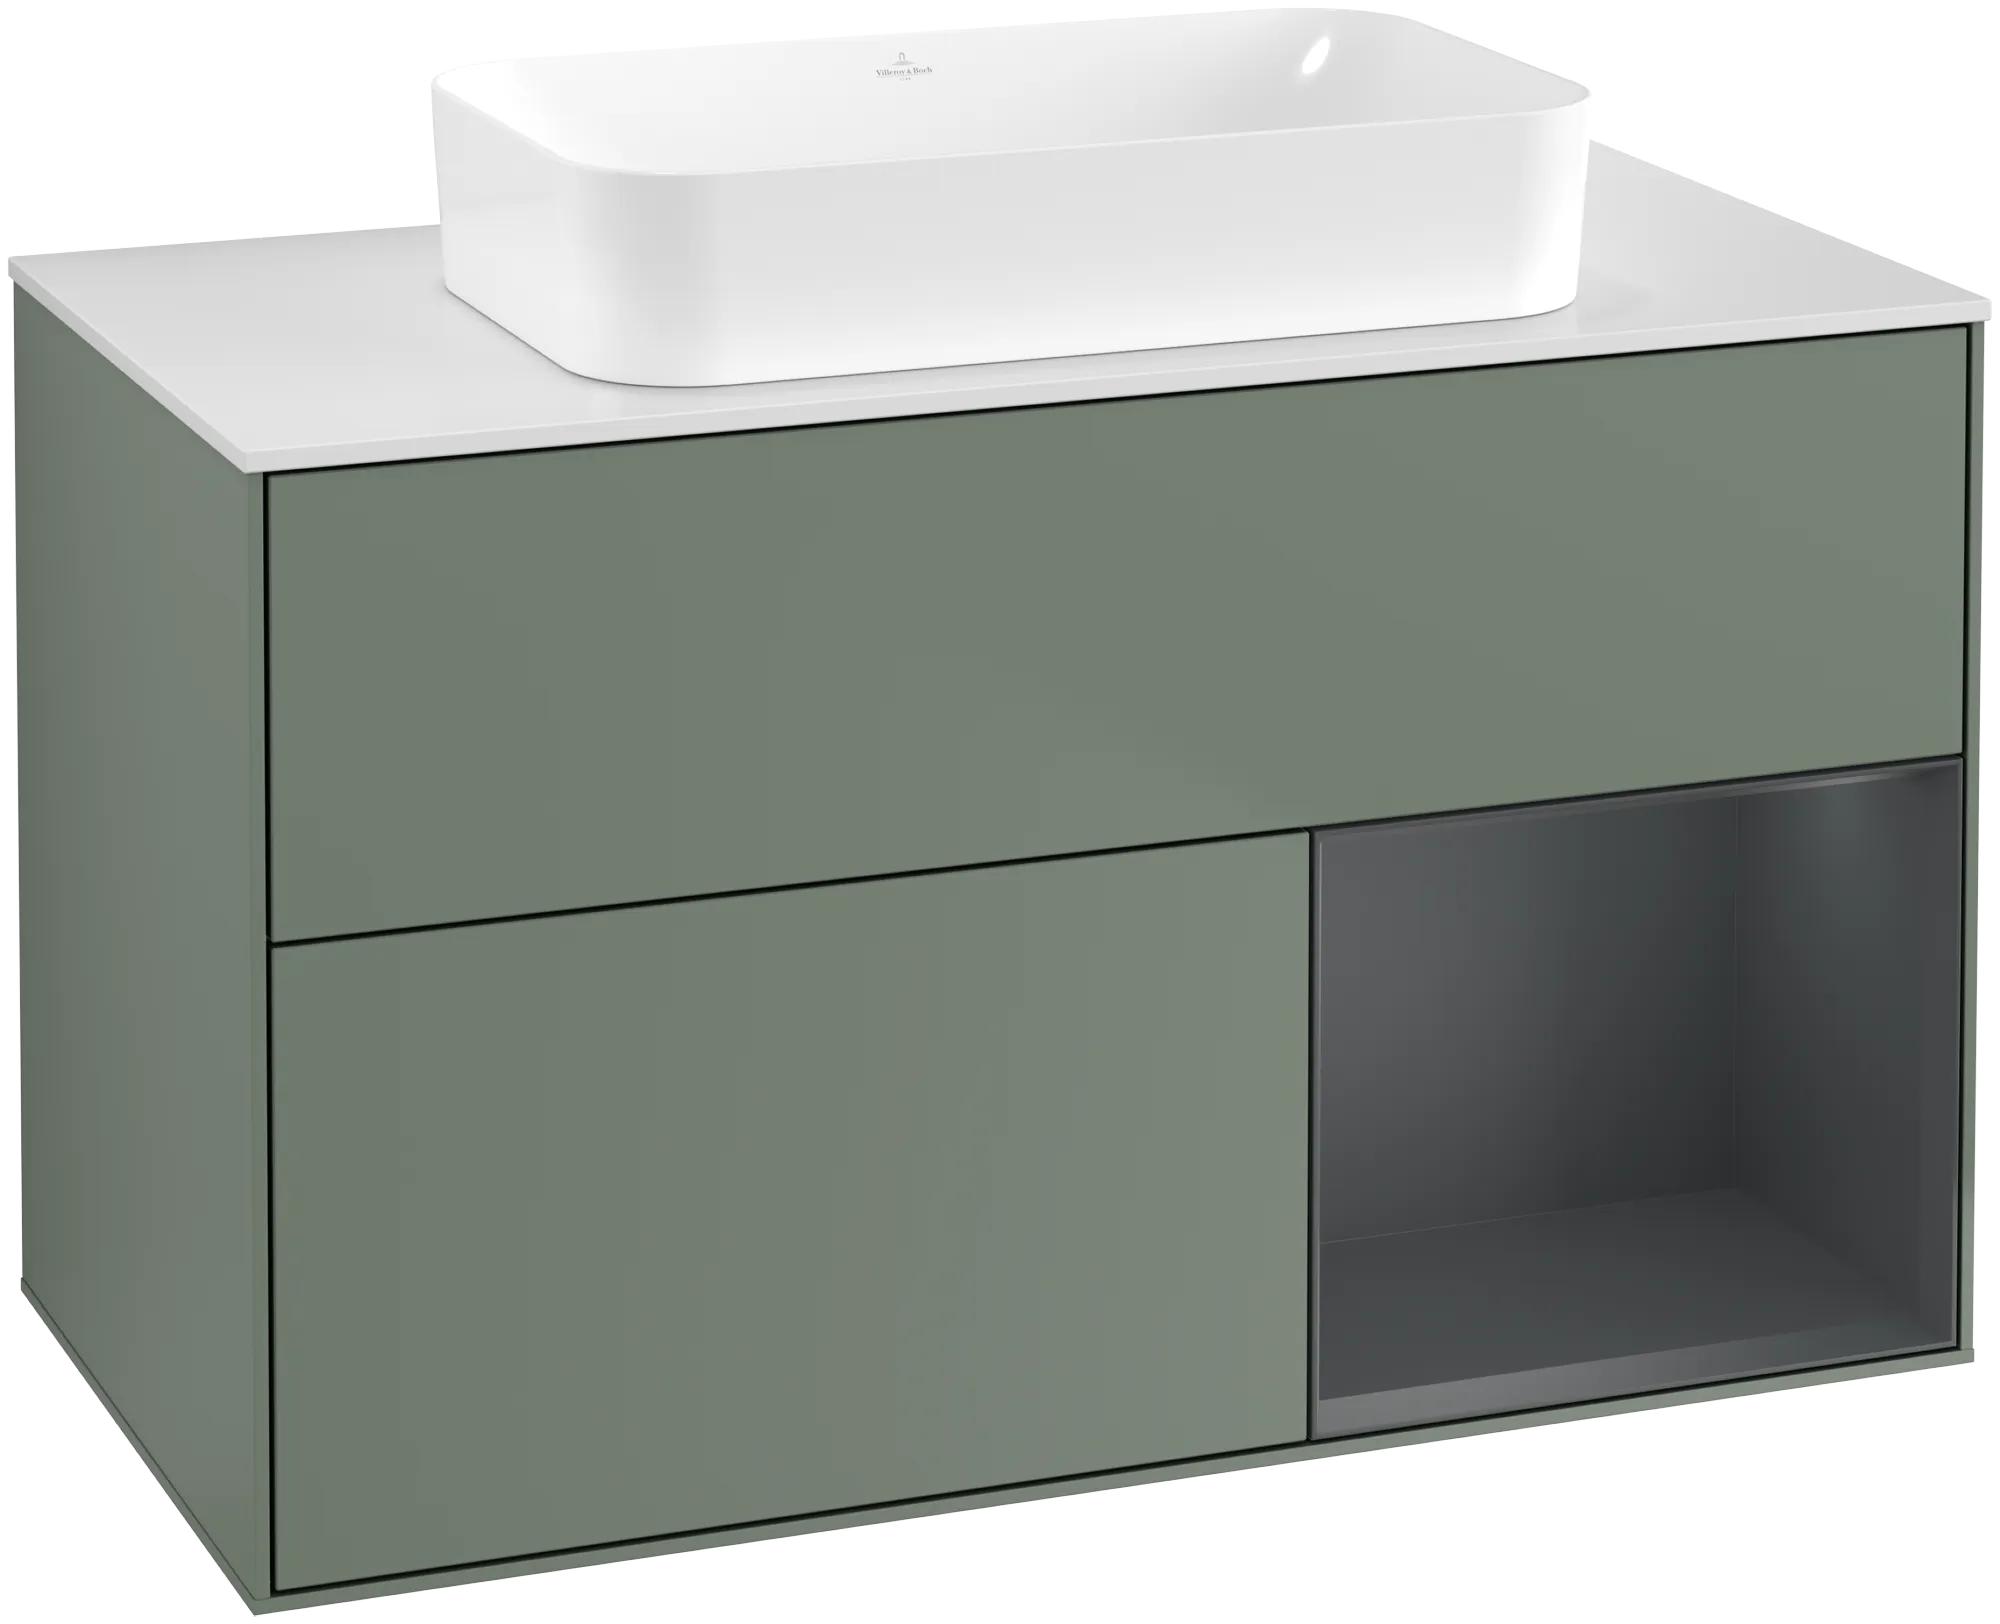 Picture of VILLEROY BOCH Finion Vanity unit, with lighting, 2 pull-out compartments, 1000 x 603 x 501 mm, Olive Matt Lacquer / Midnight Blue Matt Lacquer / Glass White Matt #G661HGGM